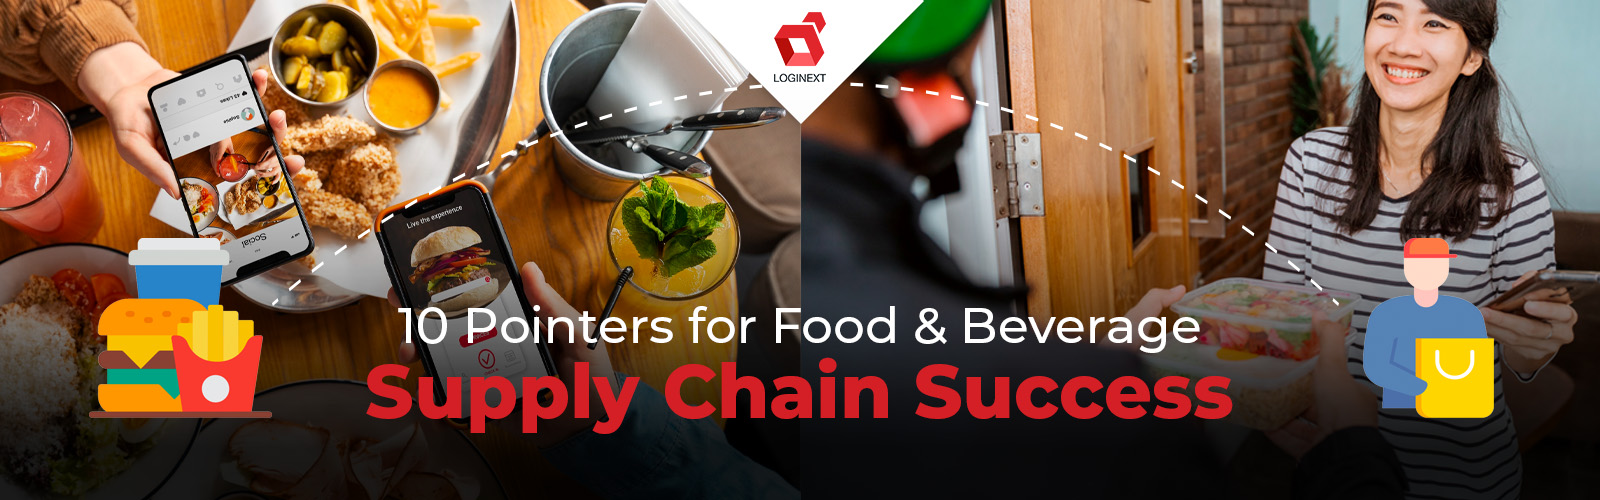 10 Pointers for Food & Beverage Supply Chain Success